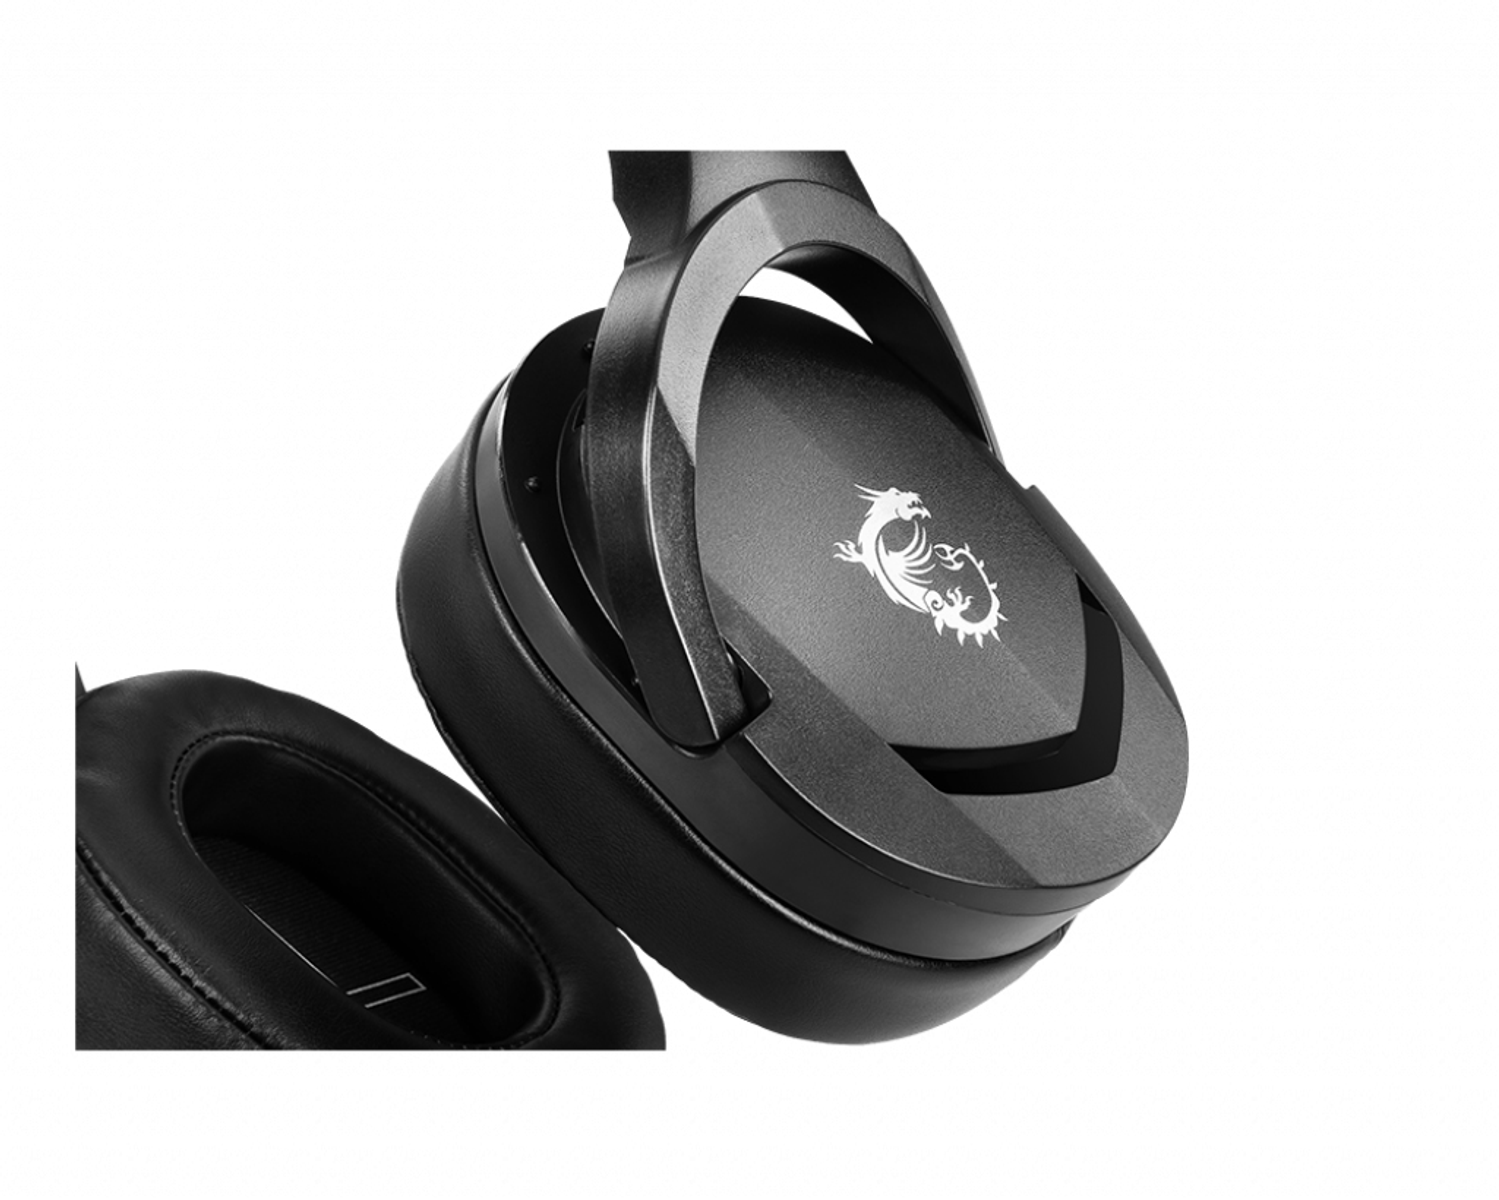 MSI S37-2101030-SV1 GH20, Schwarz Over-ear IMMERSE Gaming Headset